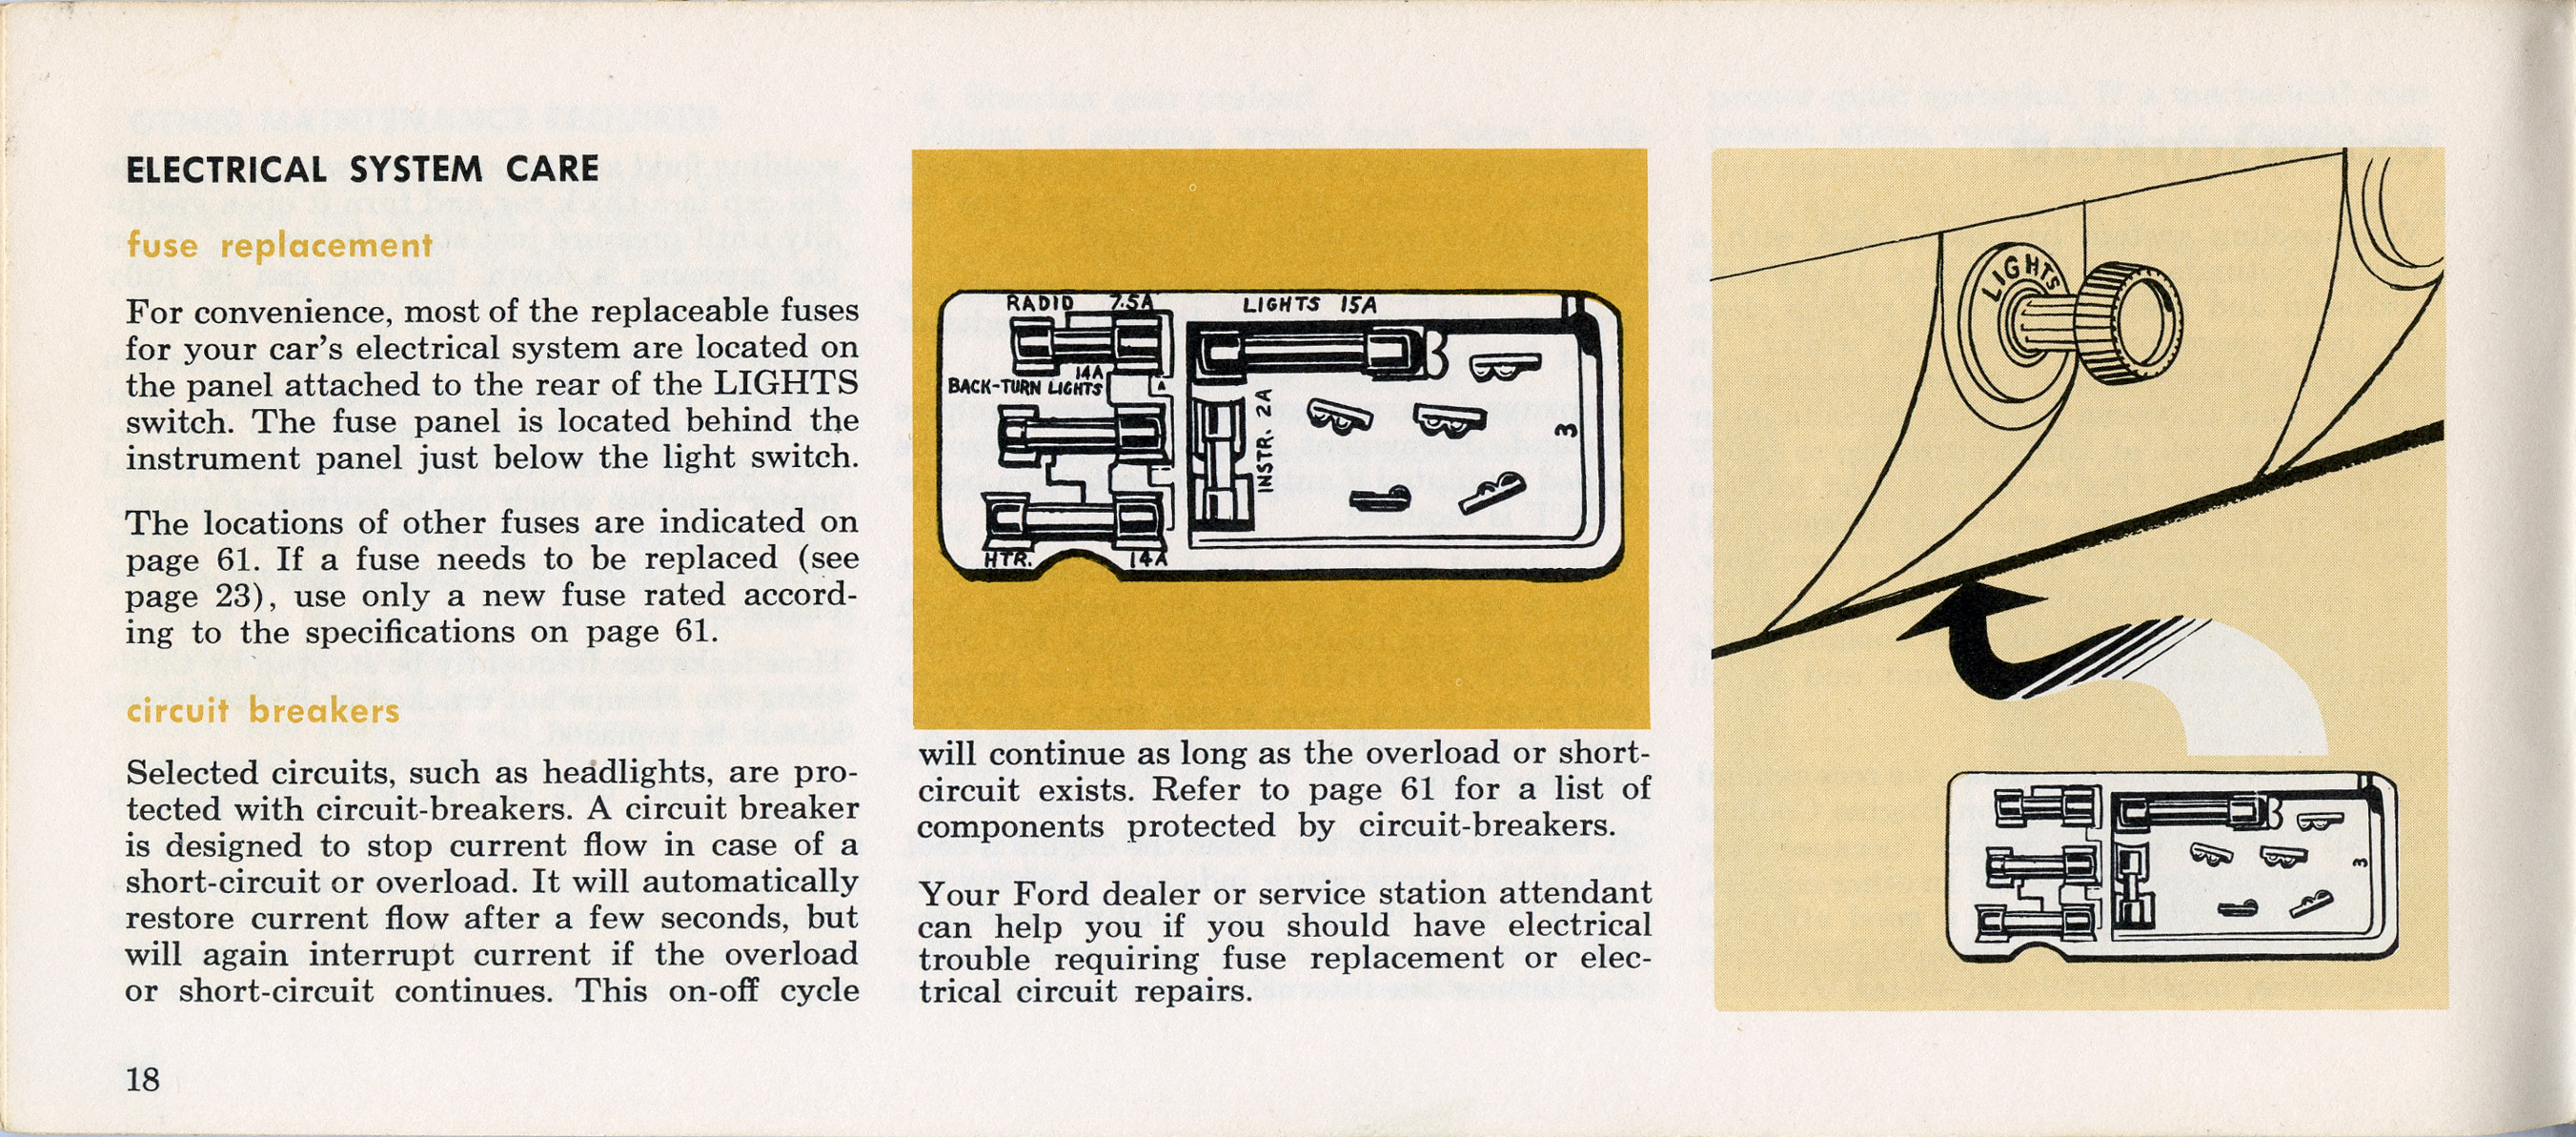 1964 Ford Falcon Owners Manual-18